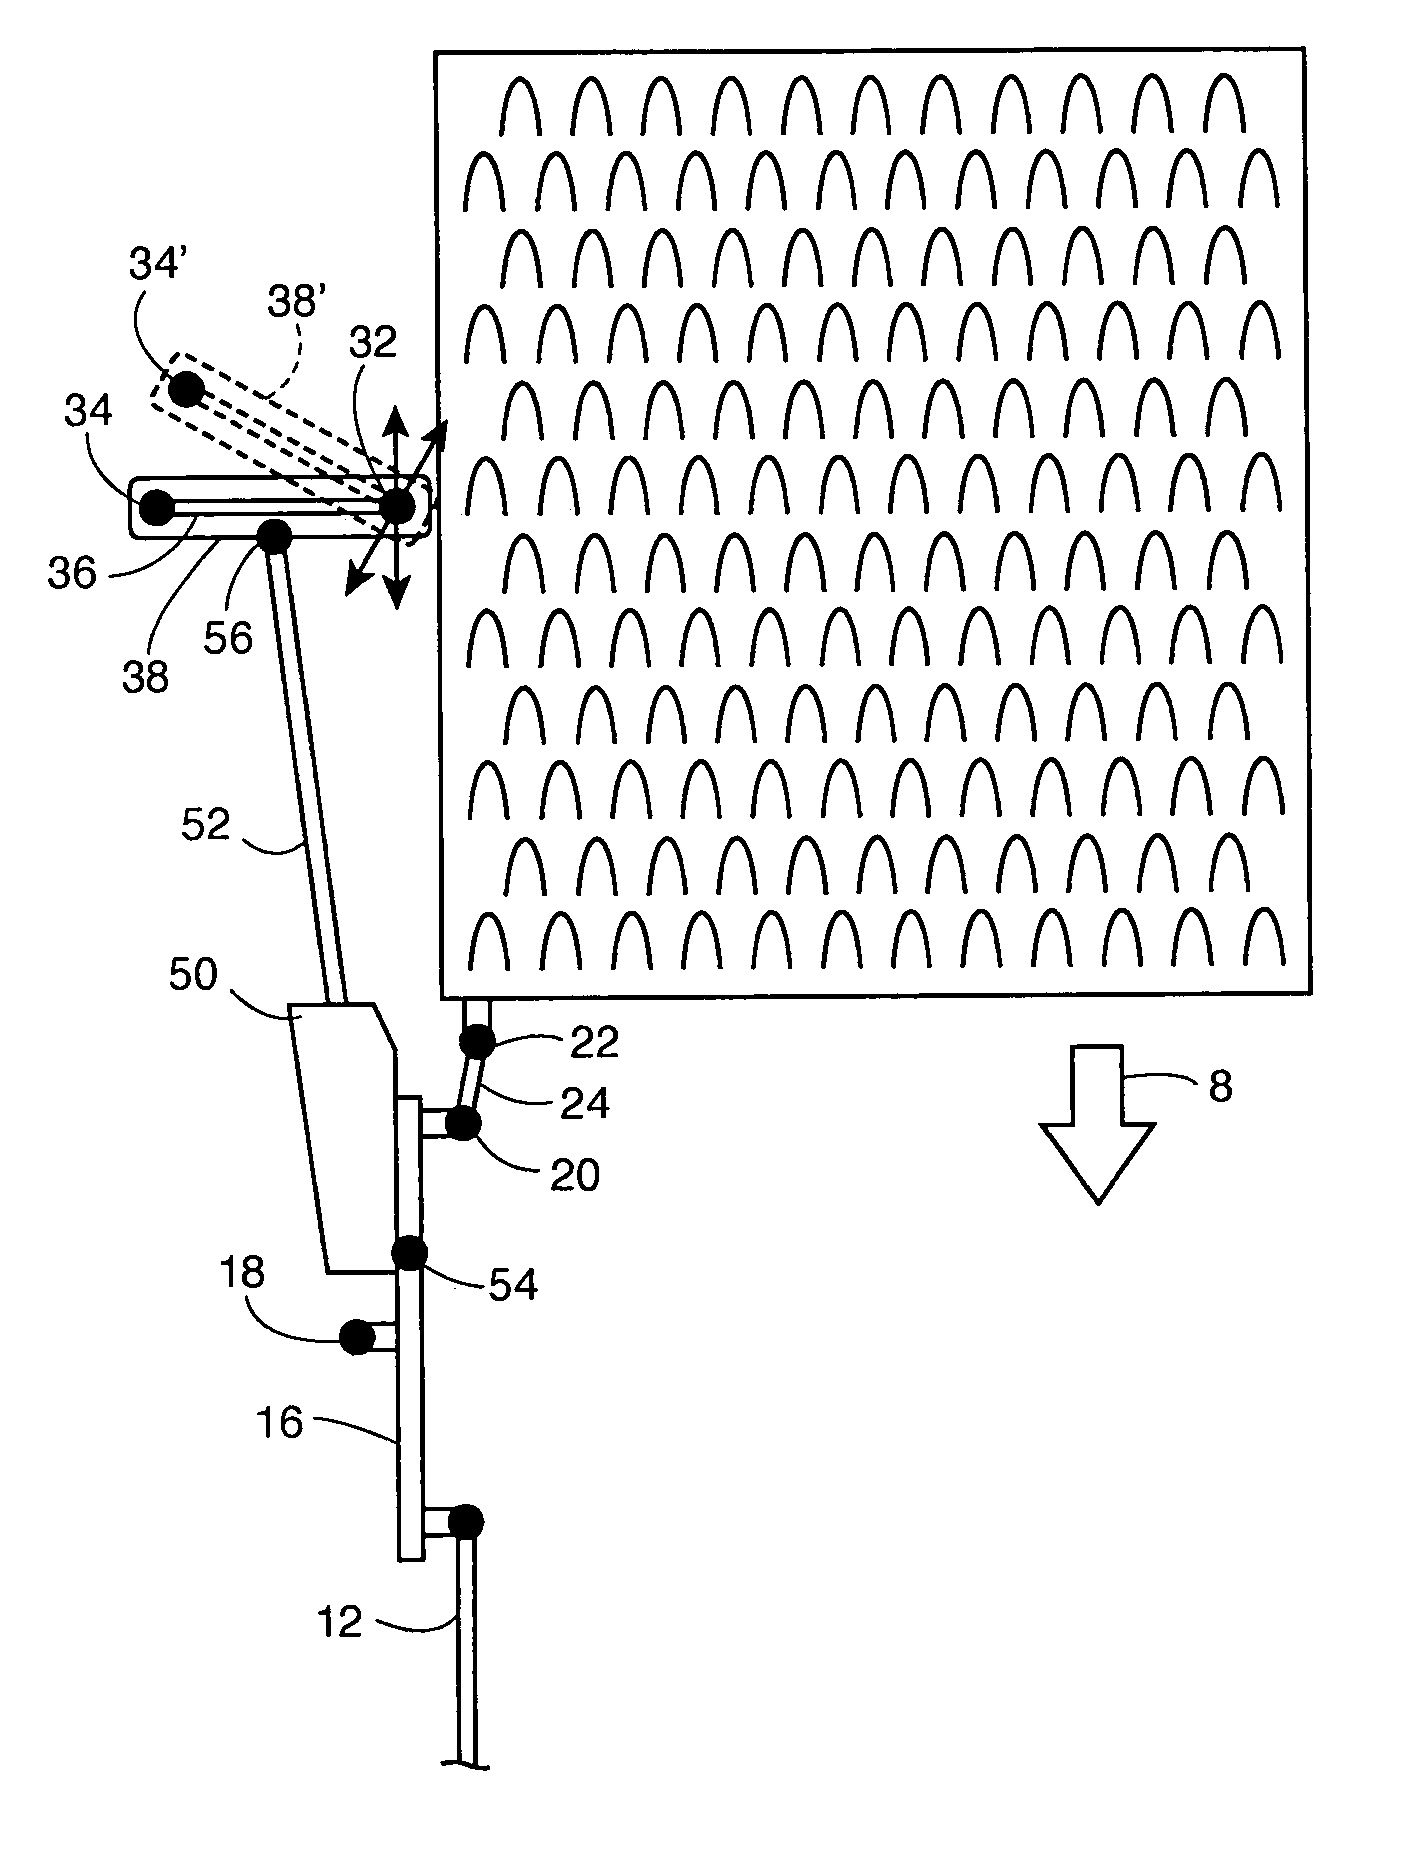 Grain cleaning system for a combine harvester